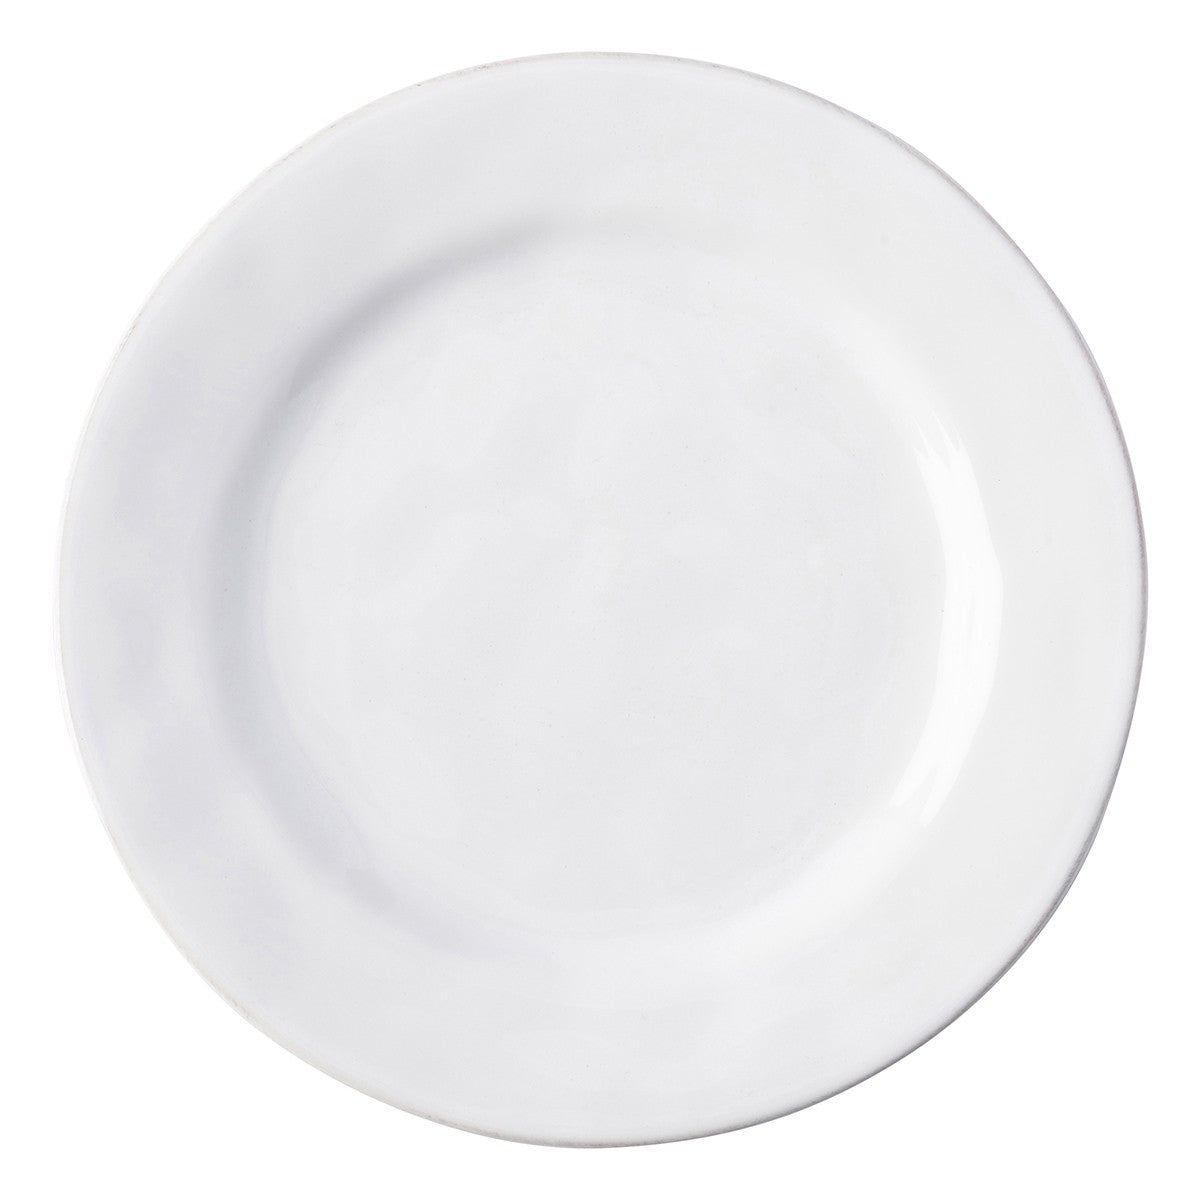 puro cocktail plate on a white background